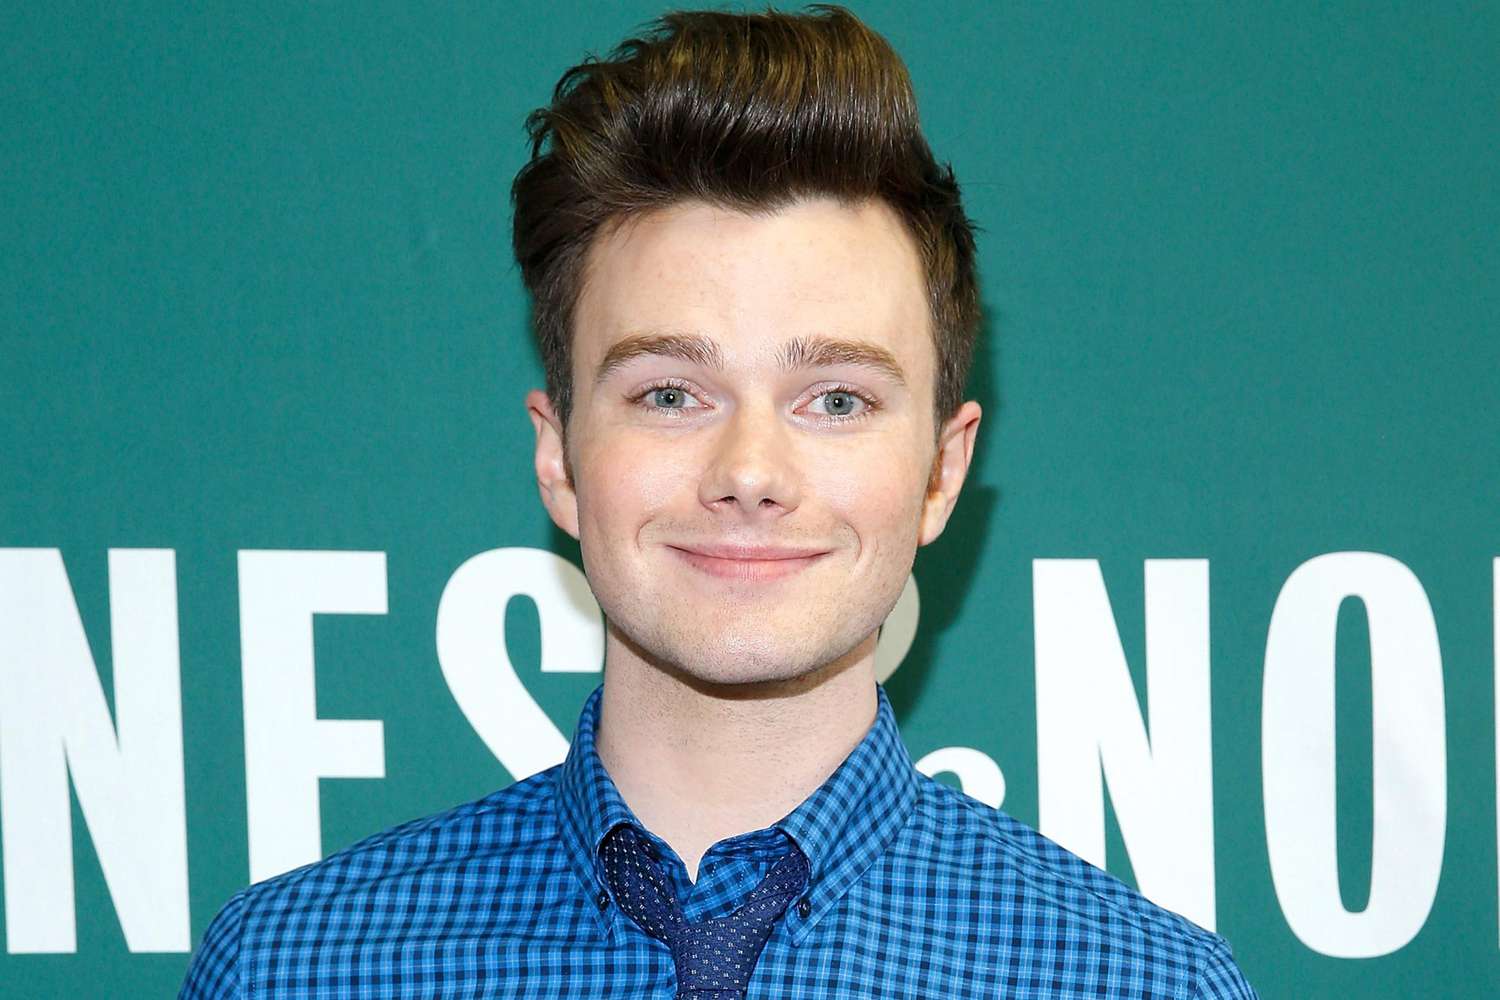 Chris Colfer Signs Copies Of "The Land Of Stories: Worlds Collide"